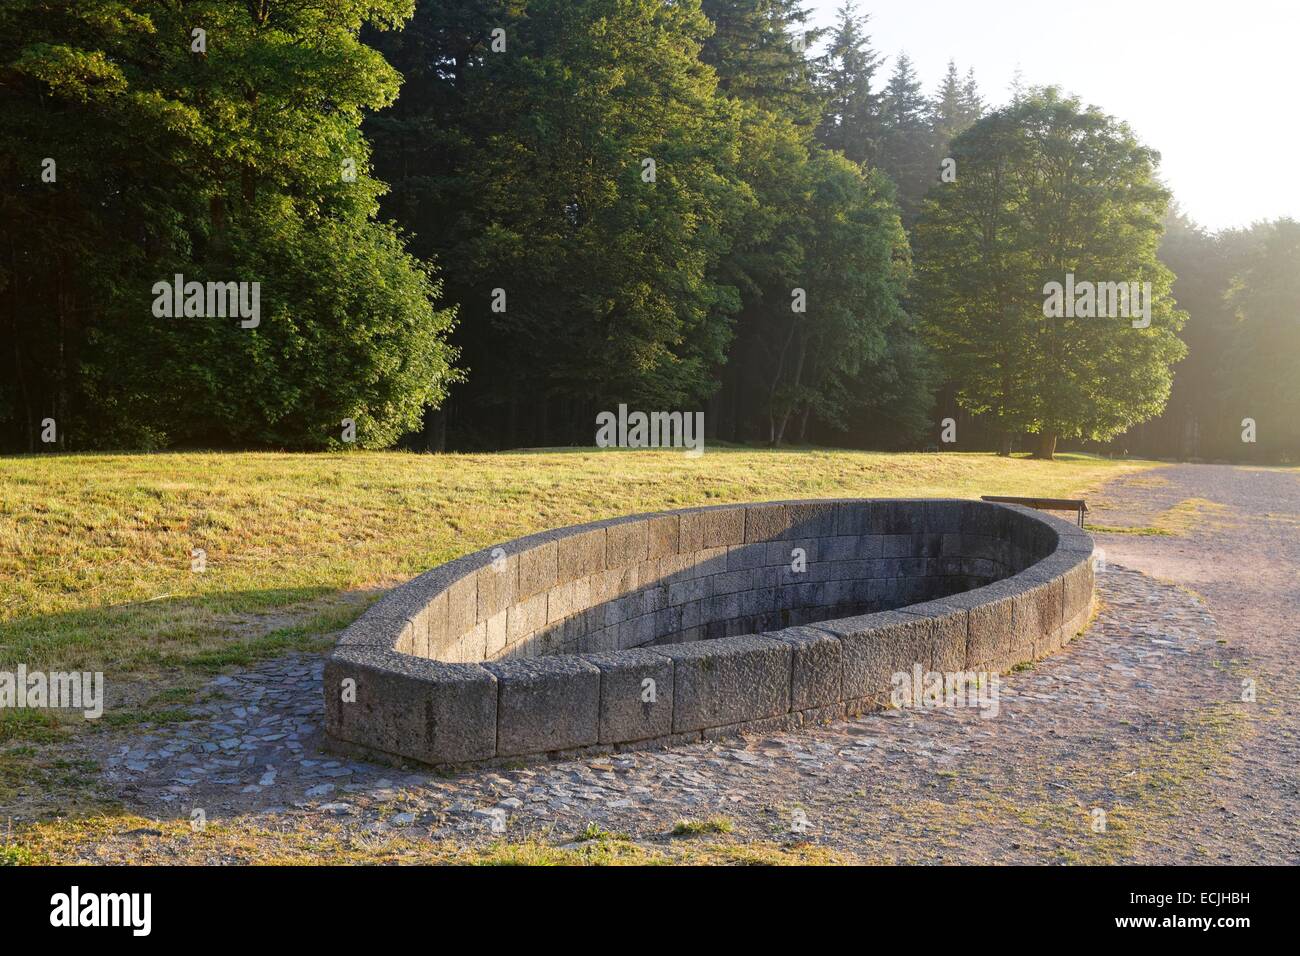 France, Saone et Loire, Saint Leger sous Beuvray, Bibracte, a Gaulish oppidum or fortified city, was the capital of the Aedui and one of the most important hillforts in Gaul, Monumental Fountain, Mont Beuvray, Parc Naturel Regional du Morvan (Regional Nat Stock Photo